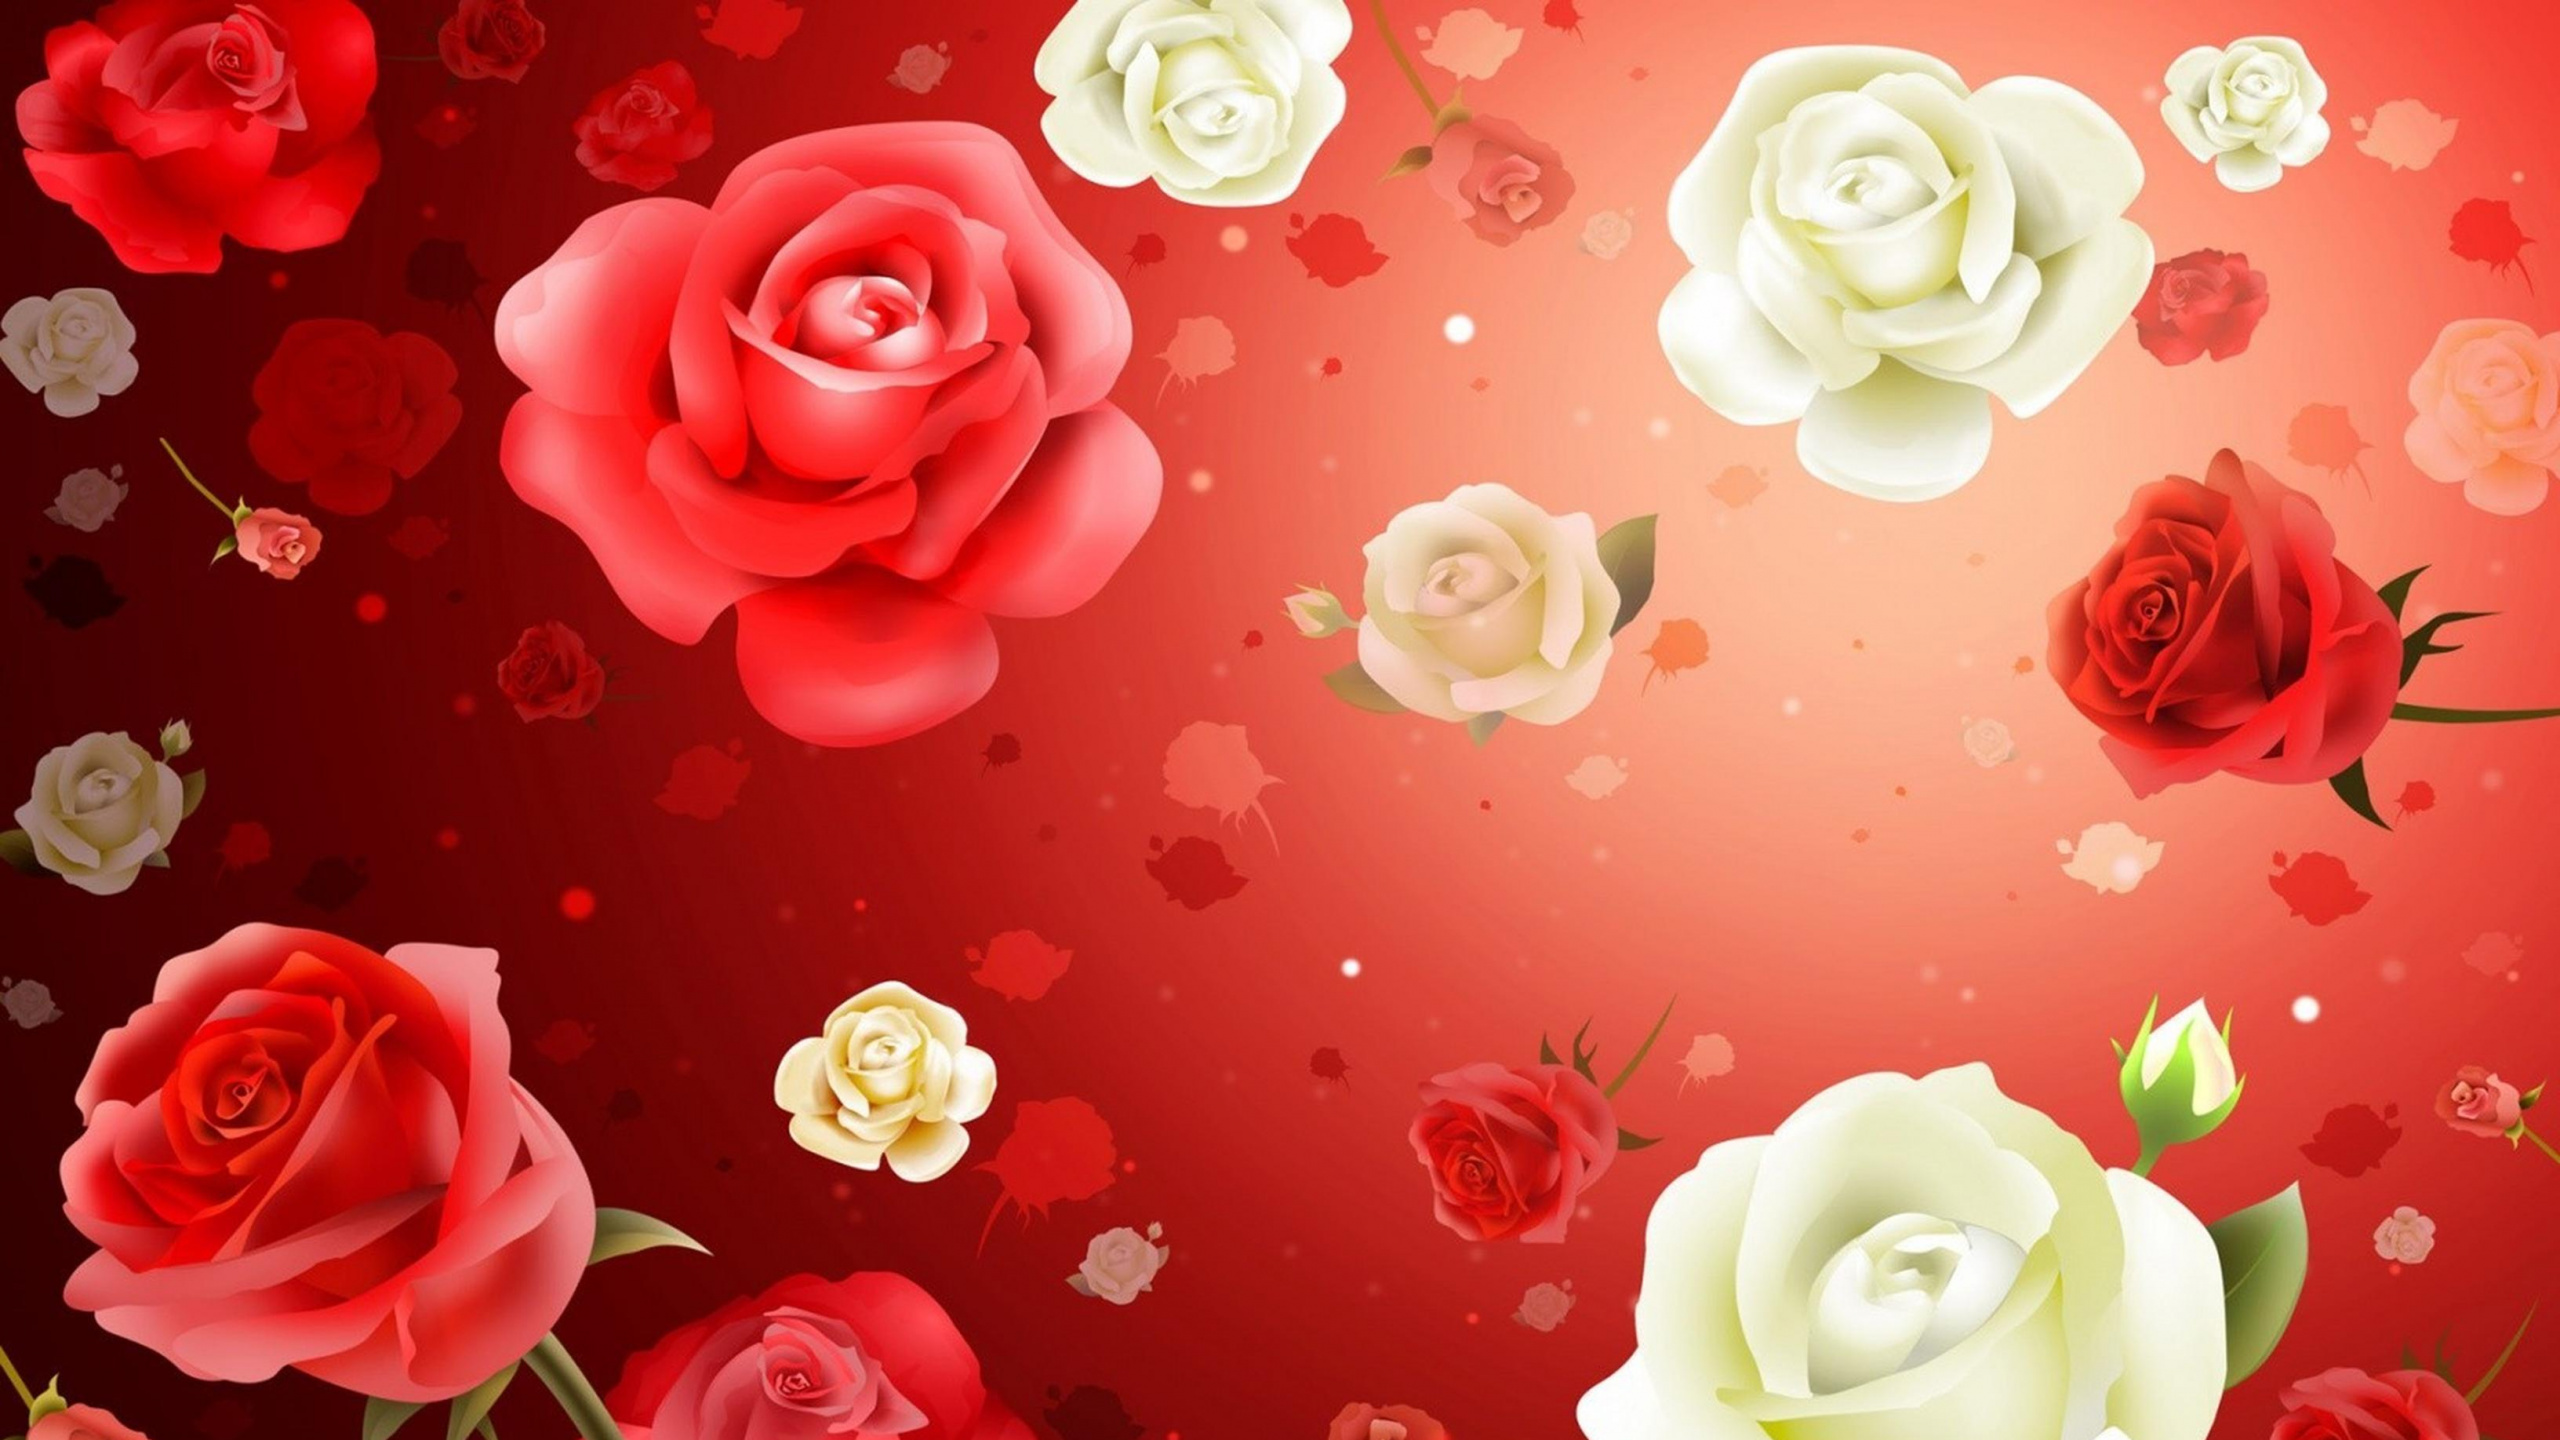 Roses Blanches et Roses Sur Surface Rouge. Wallpaper in 2560x1440 Resolution